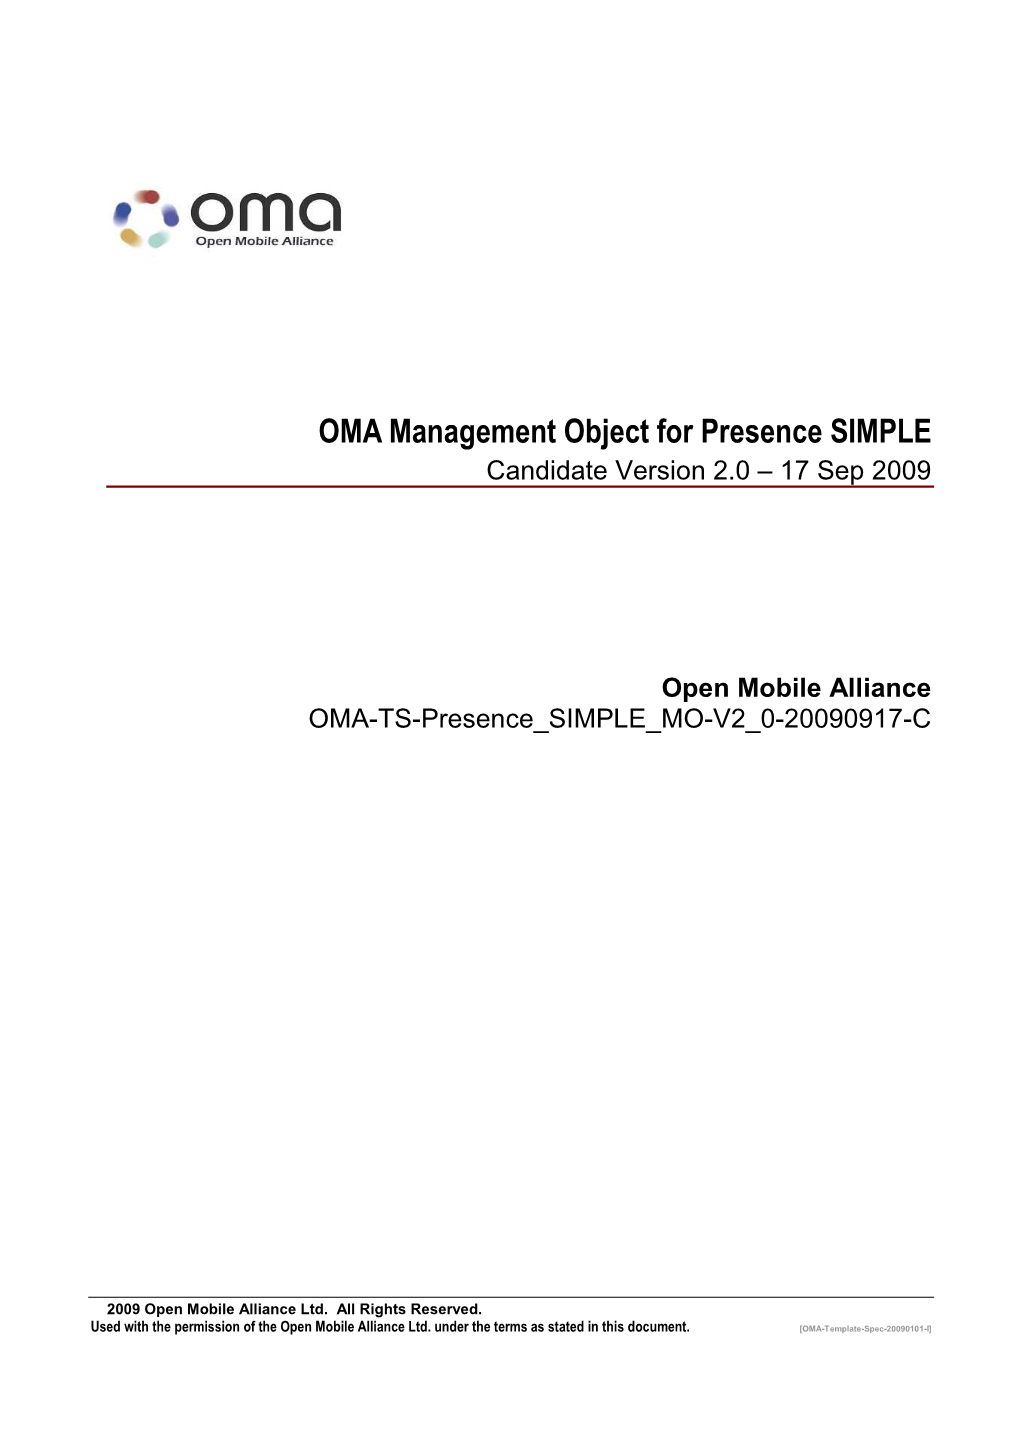 OMA Management Object for Presence SIMPLE Candidate Version 2.0 – 17 Sep 2009